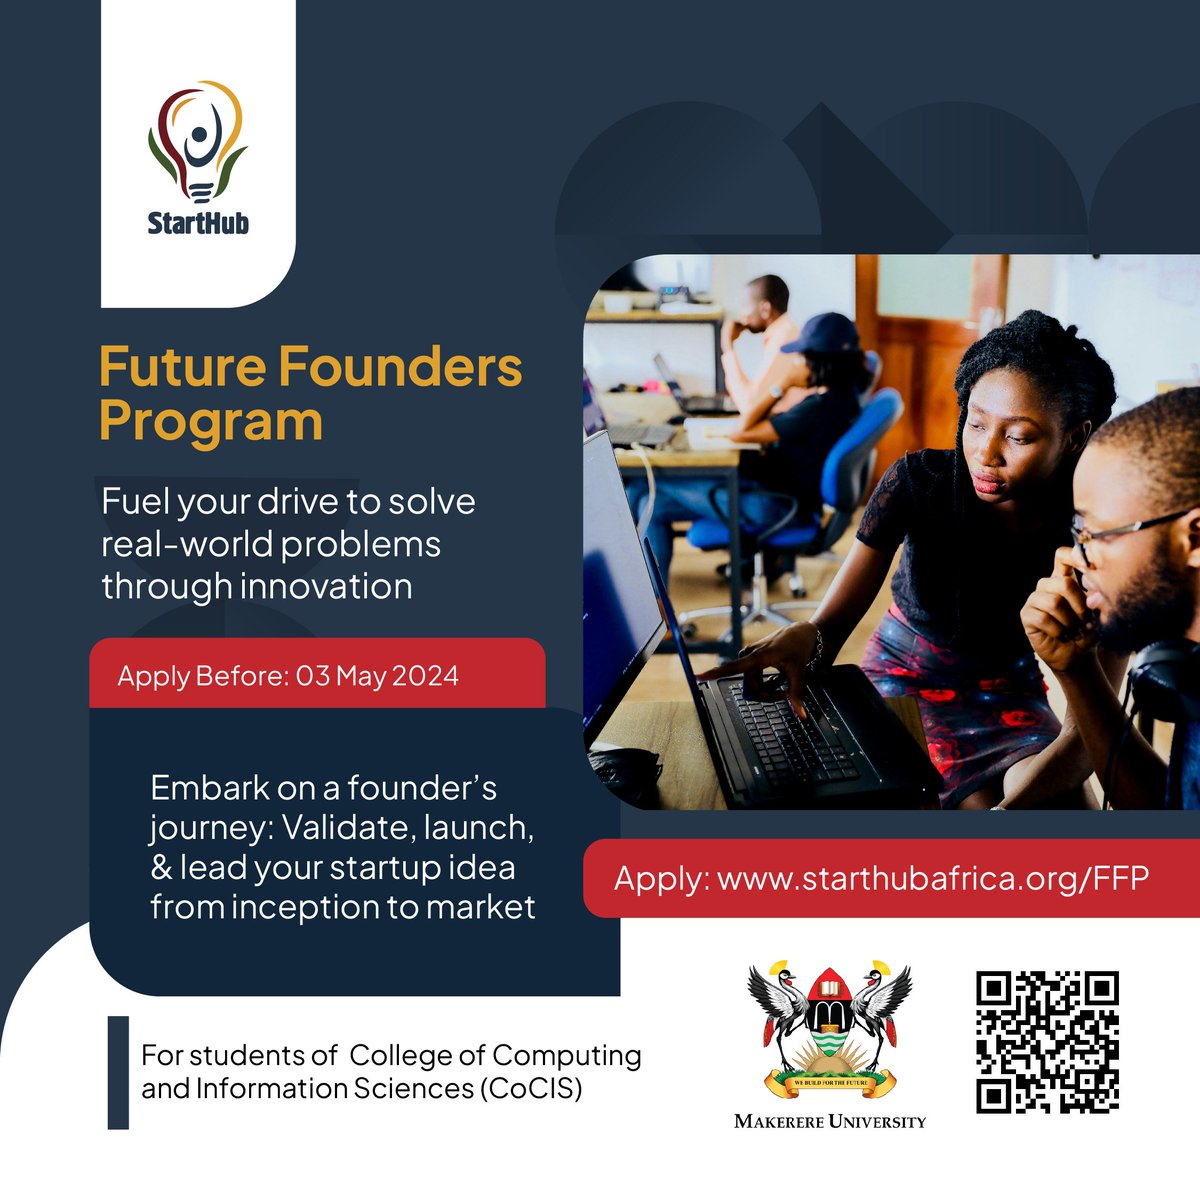 🤗Calling all Makerere University students in the College of Computing and Information Sciences with a passion for startups, innovation,and entrepreneurship! Enroll in our Future Founders program for a hands-on internship. Sign up now: starthubafrica.org/FFP